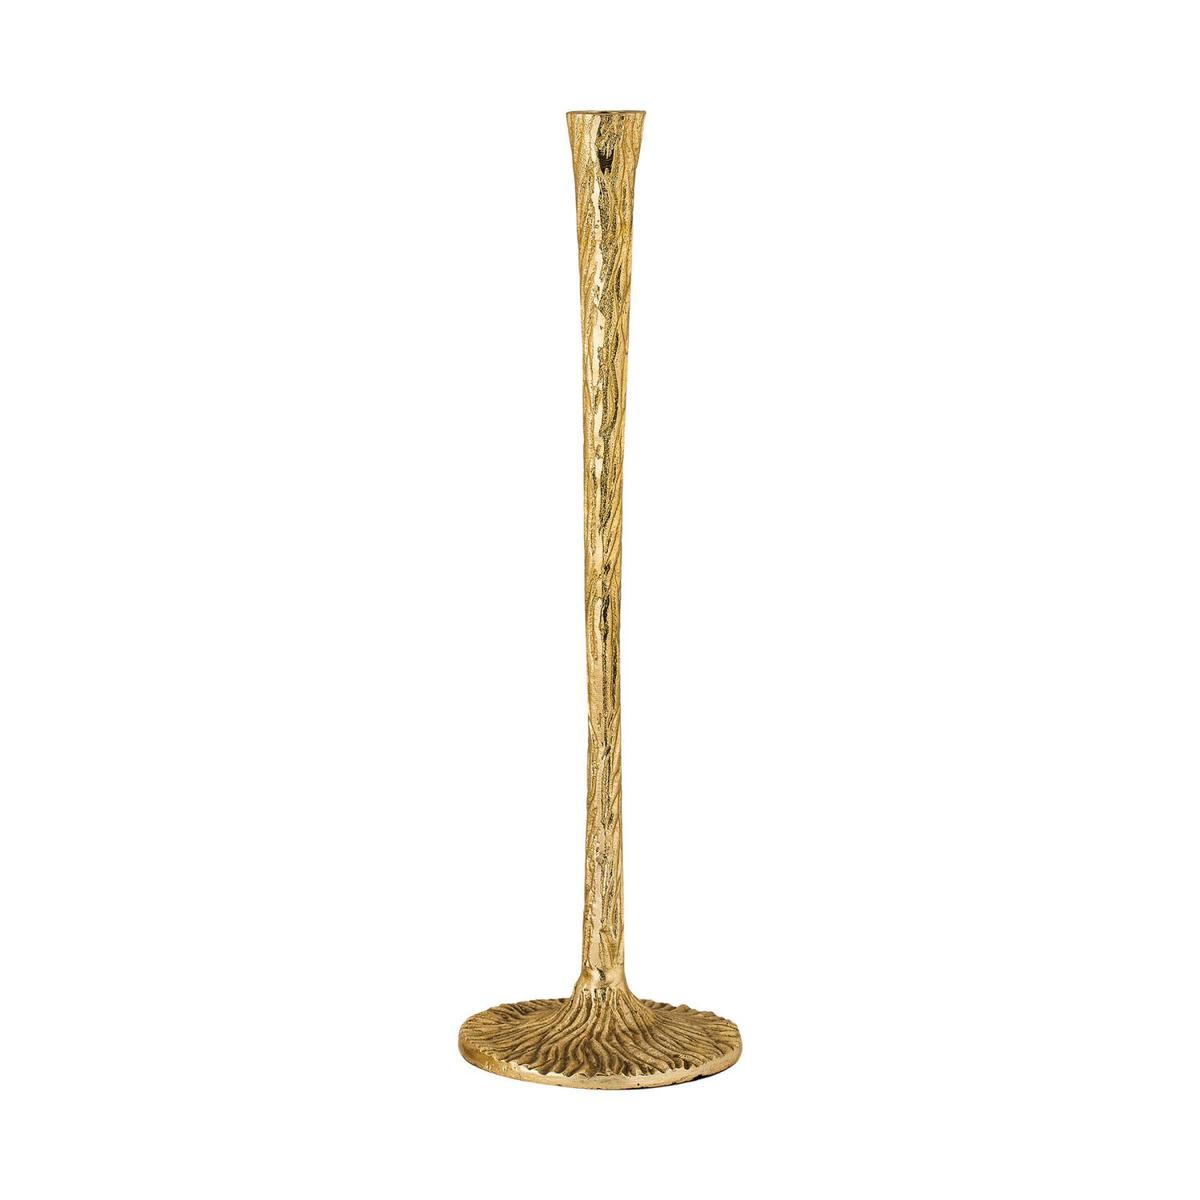 Dimond Home Small Striped Texture Candle Stick 8990-010